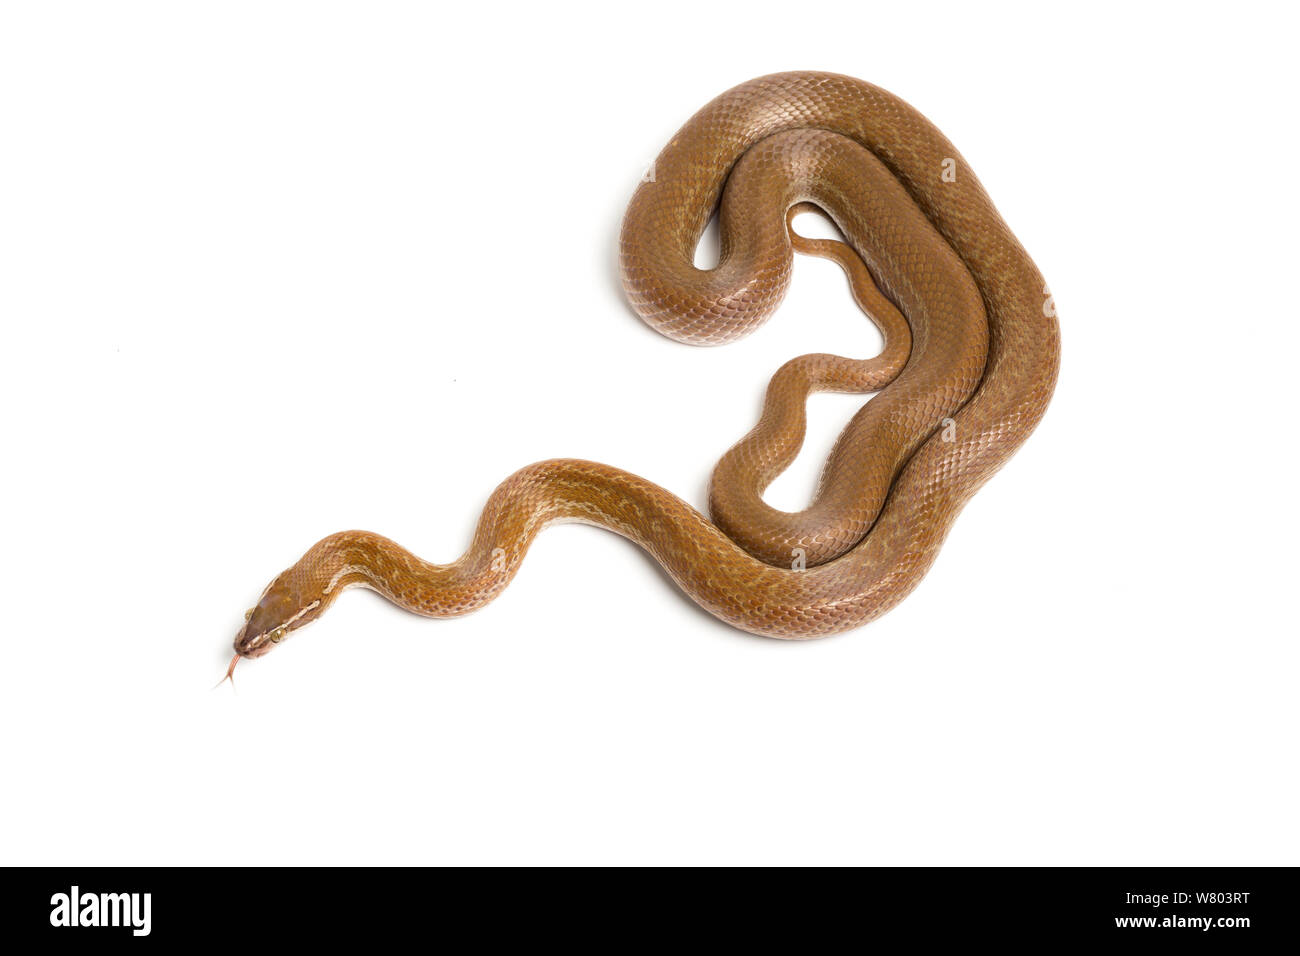 Cape house snake (Boaedon capensis) on white background.  Captive, occurs in South Africa. Stock Photo